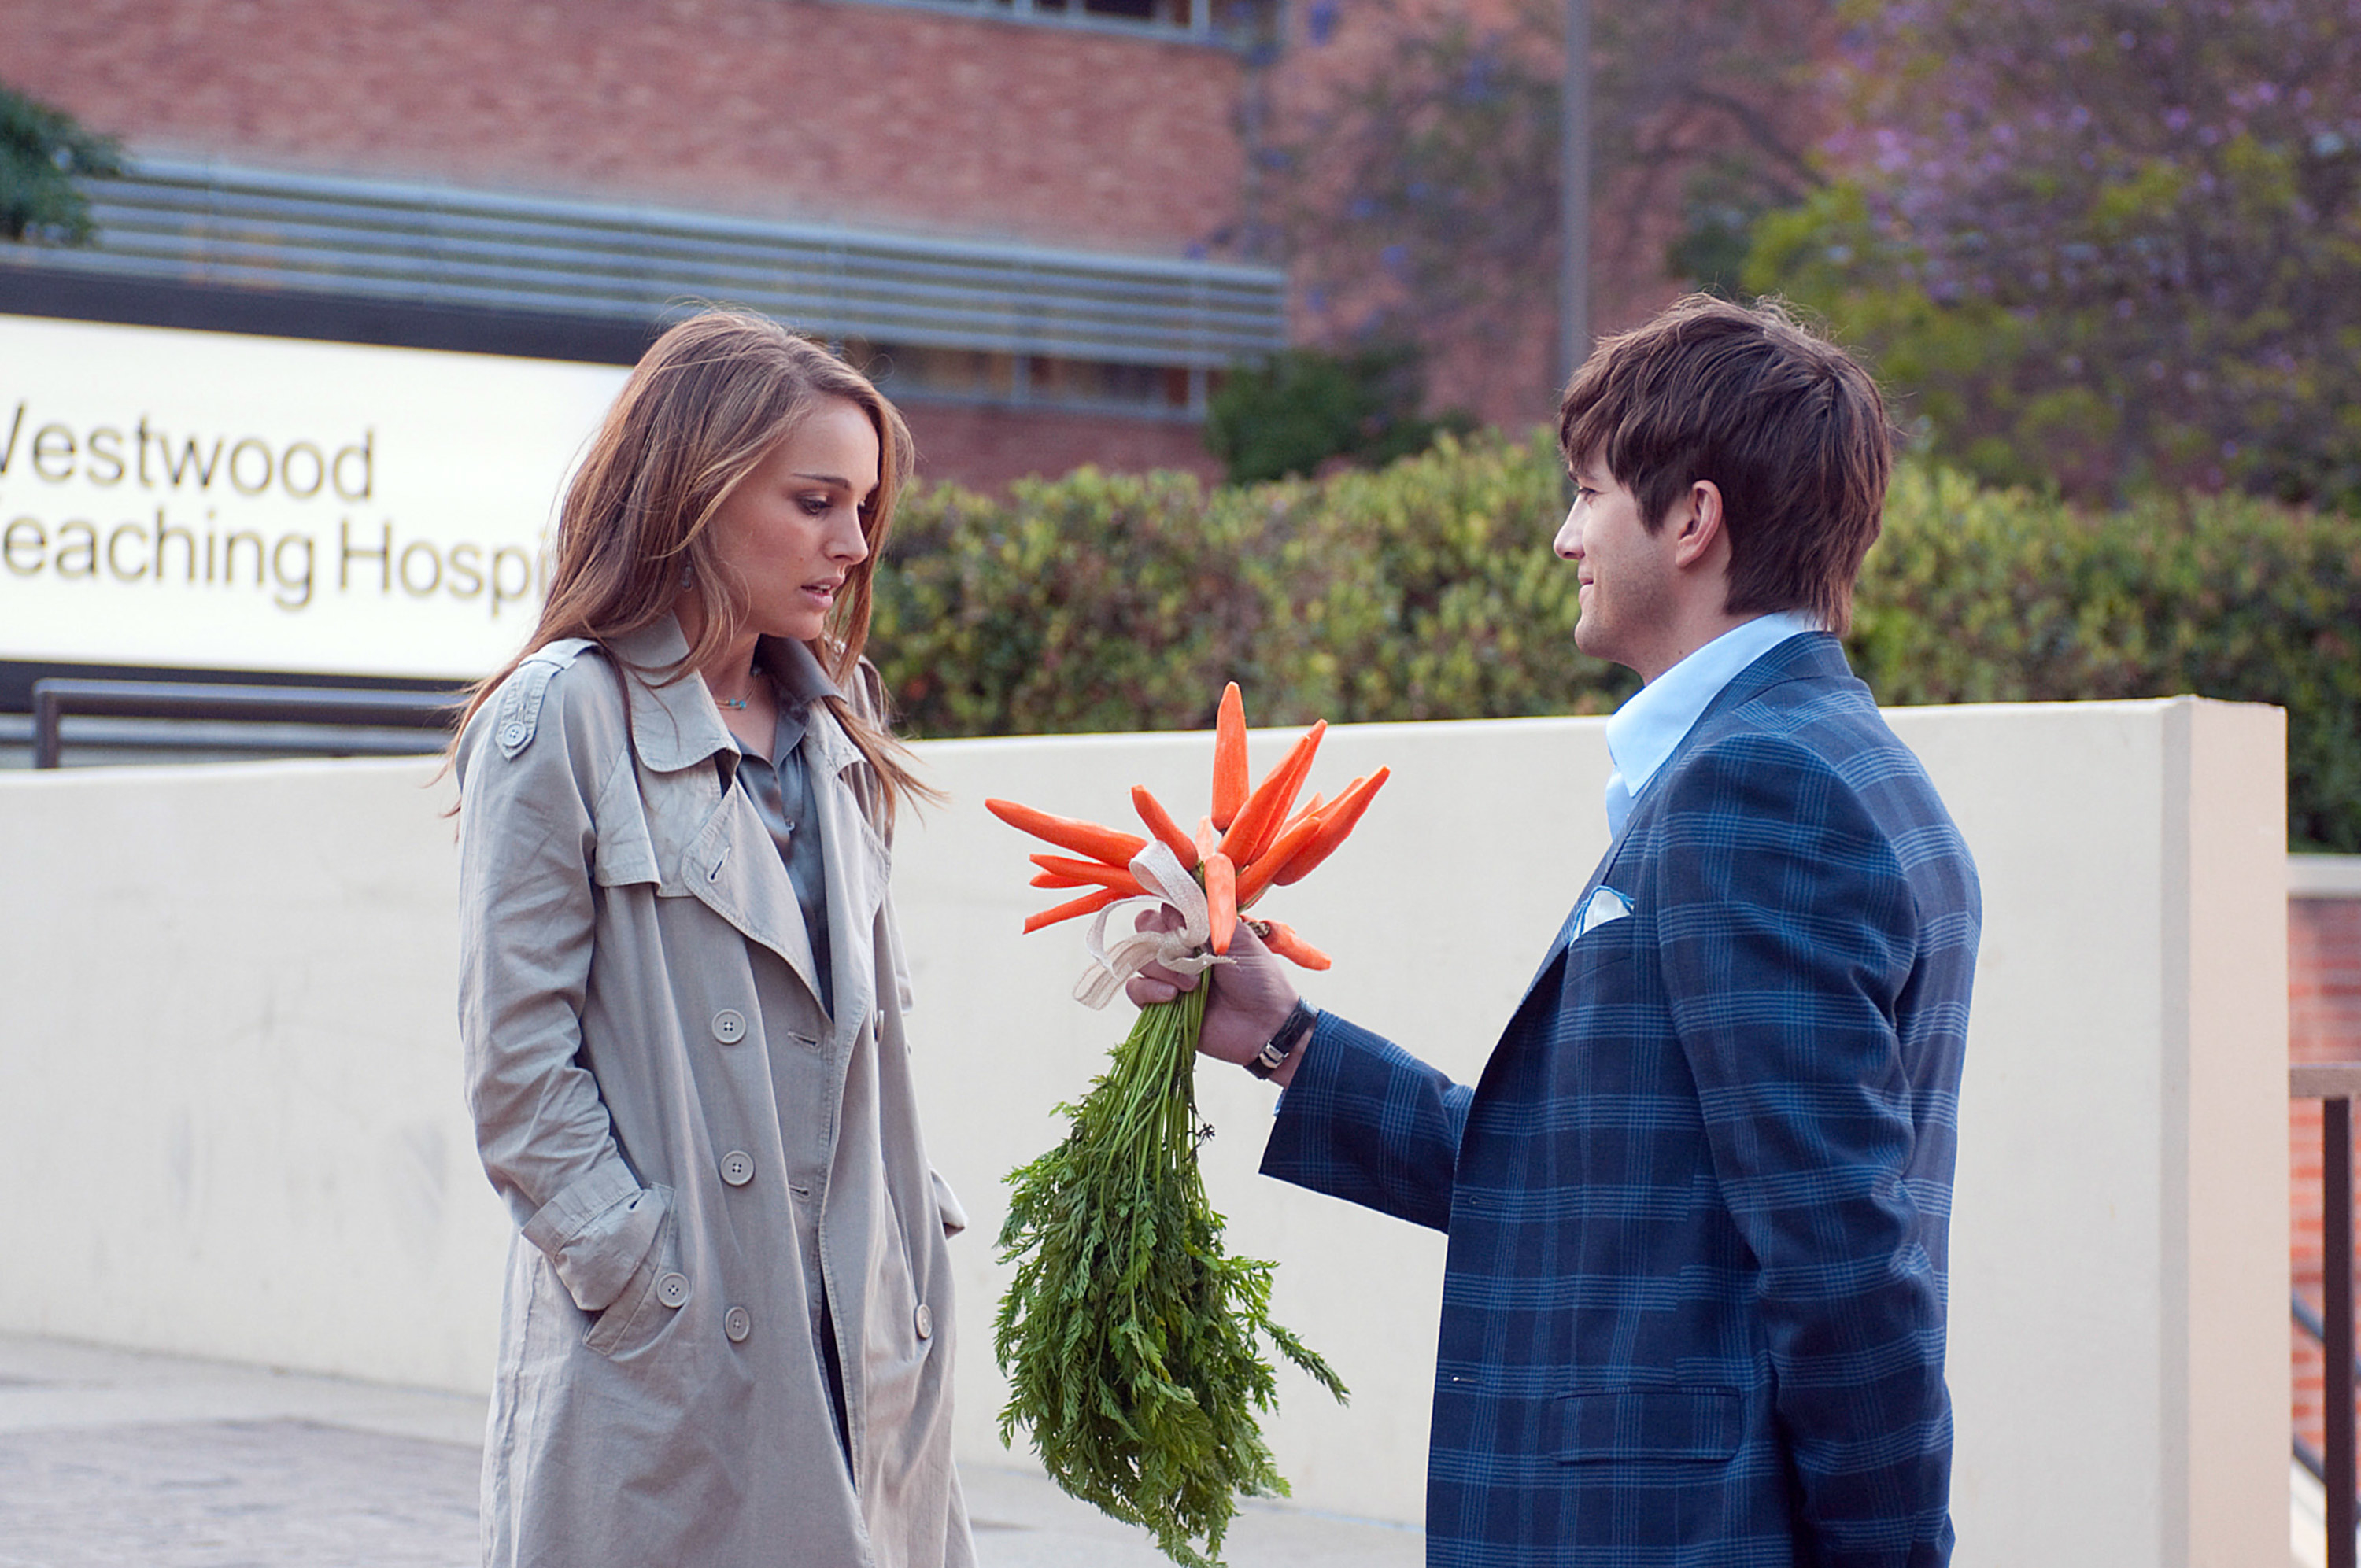 Emma appears unimpressed by the bouquet of carrots Adam offers her